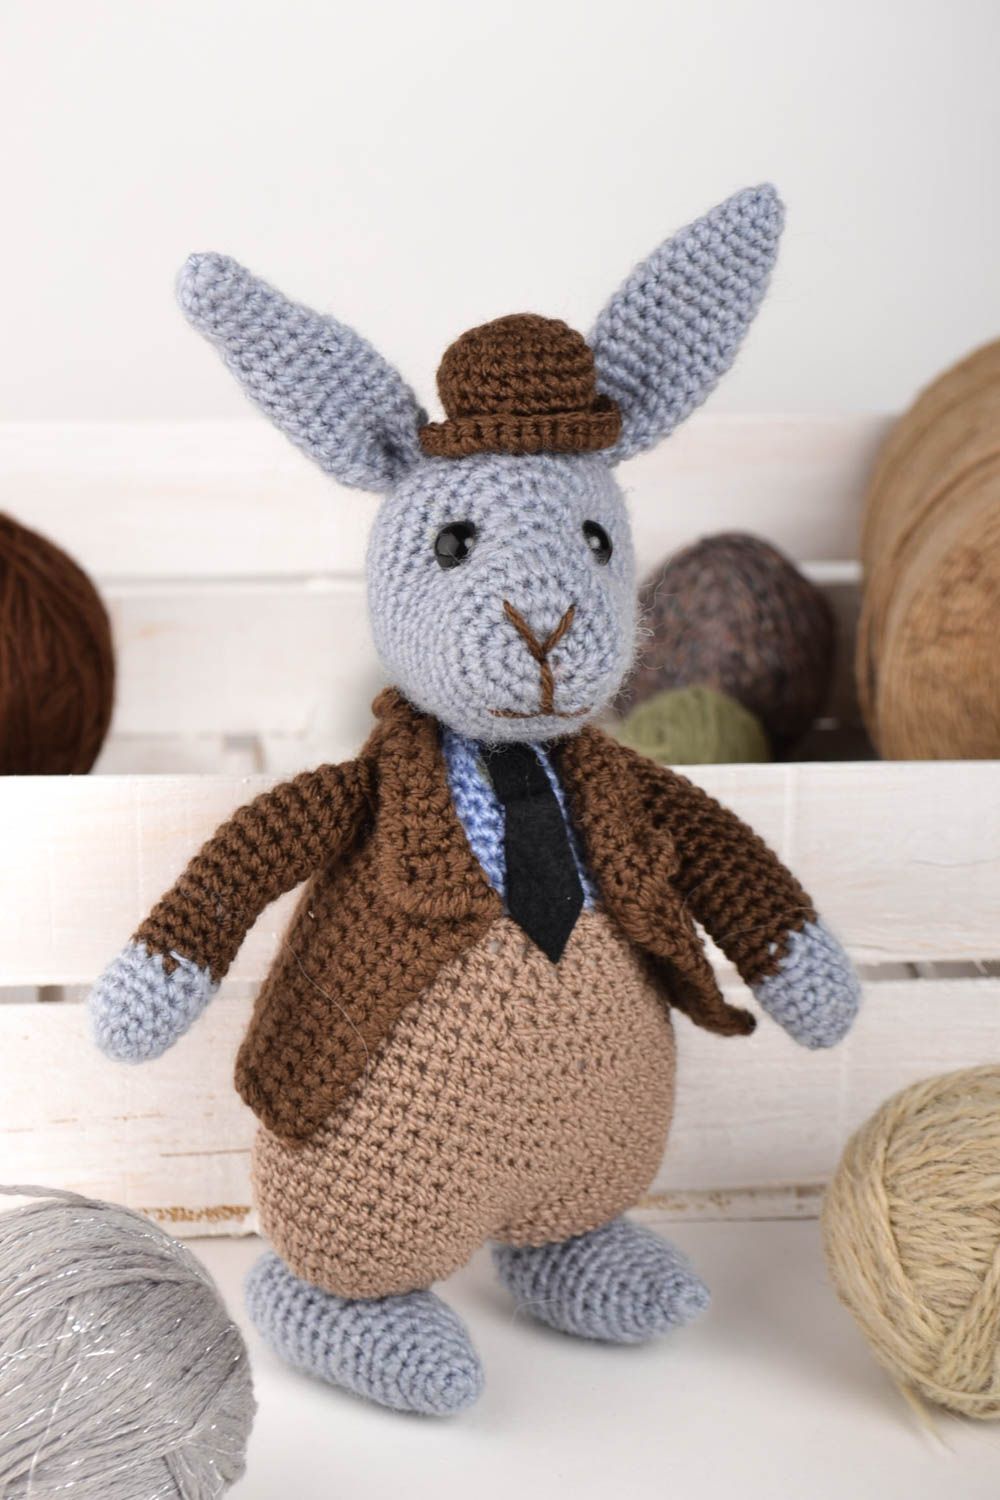 Beautiful handmade knitted toy soft toy for kids interior decorating small gifts photo 1